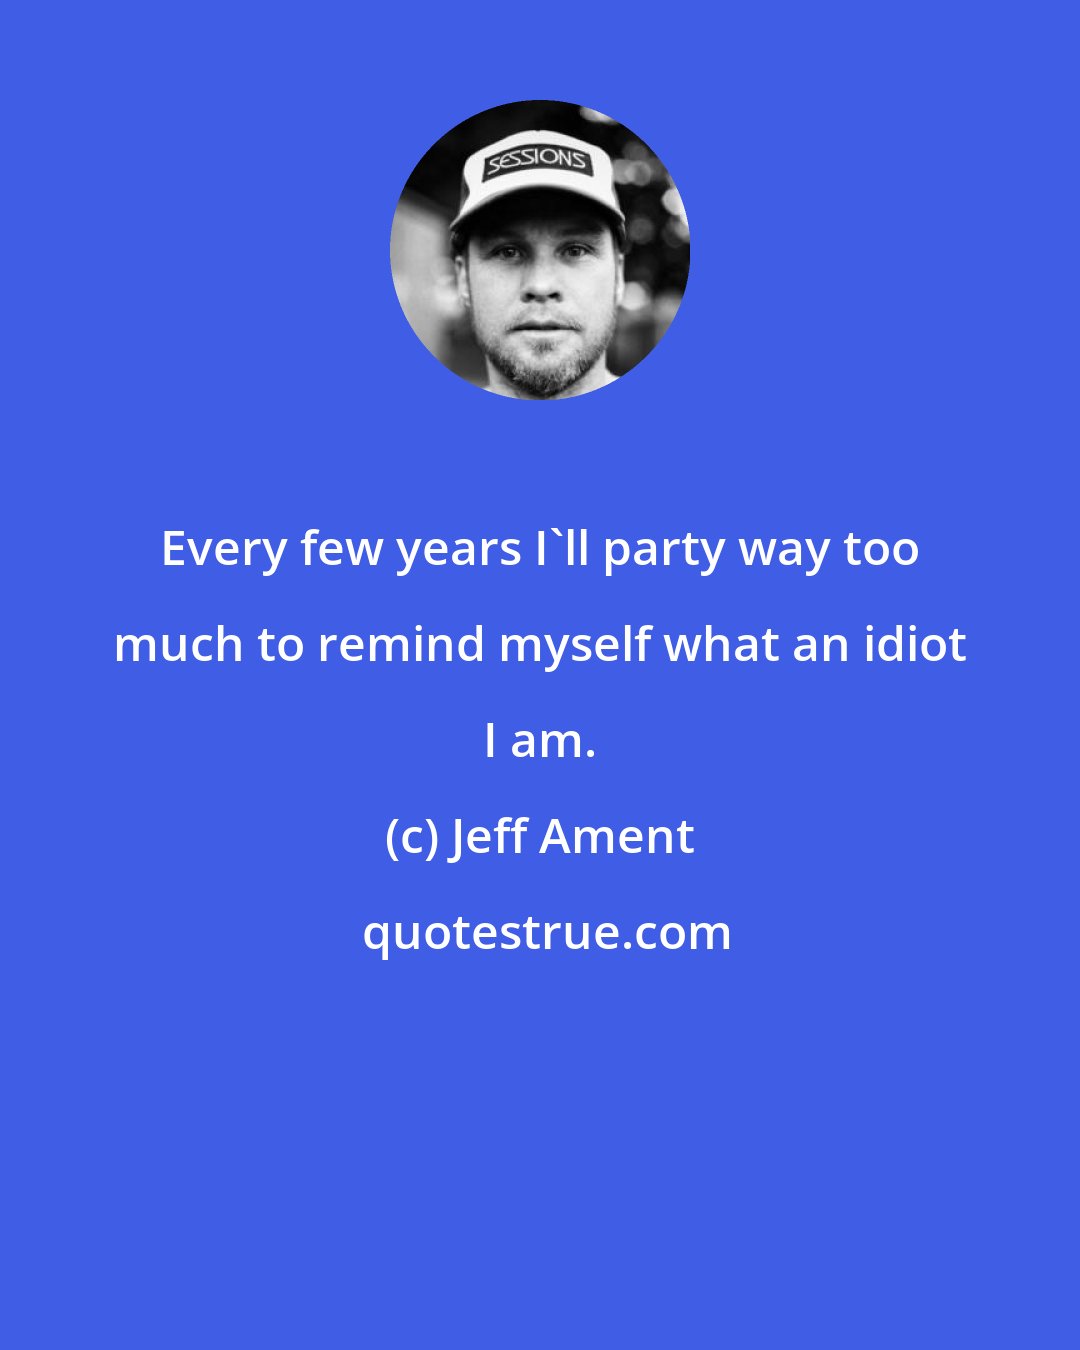 Jeff Ament: Every few years I'll party way too much to remind myself what an idiot I am.